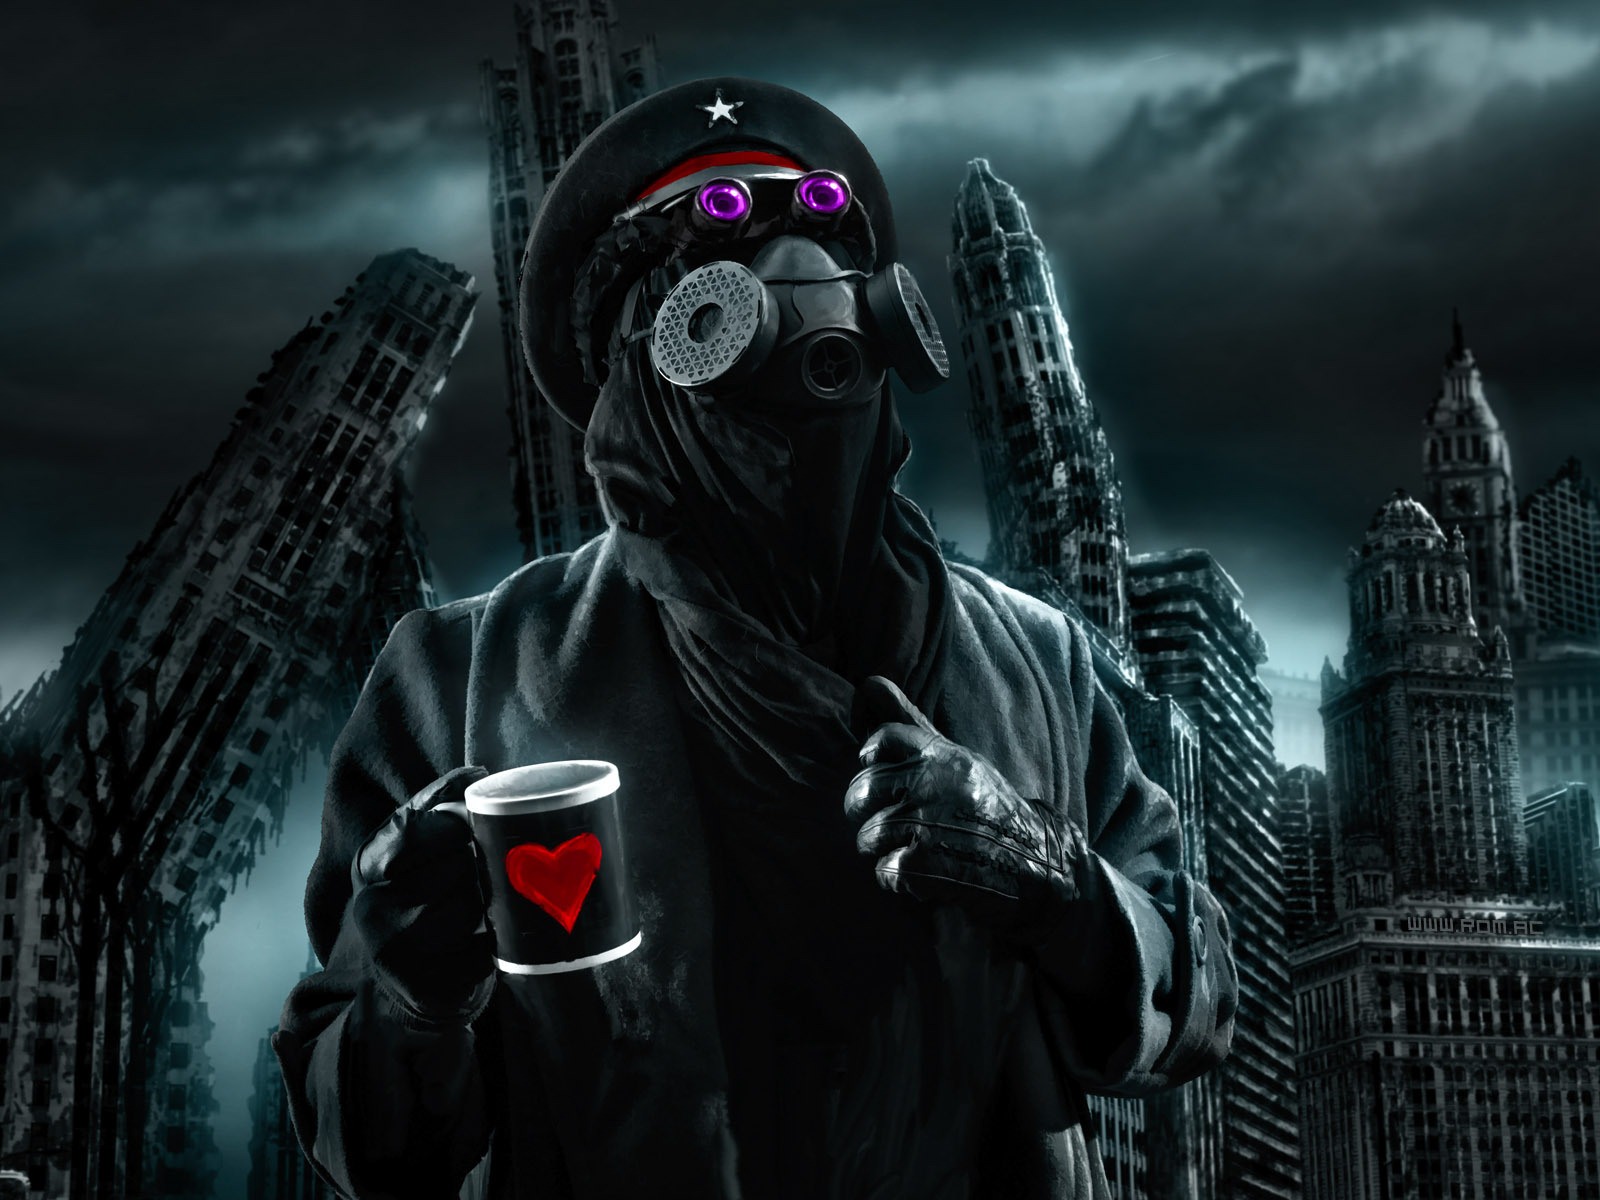 Romantically Apocalyptic creative painting wallpapers (2) #15 - 1600x1200